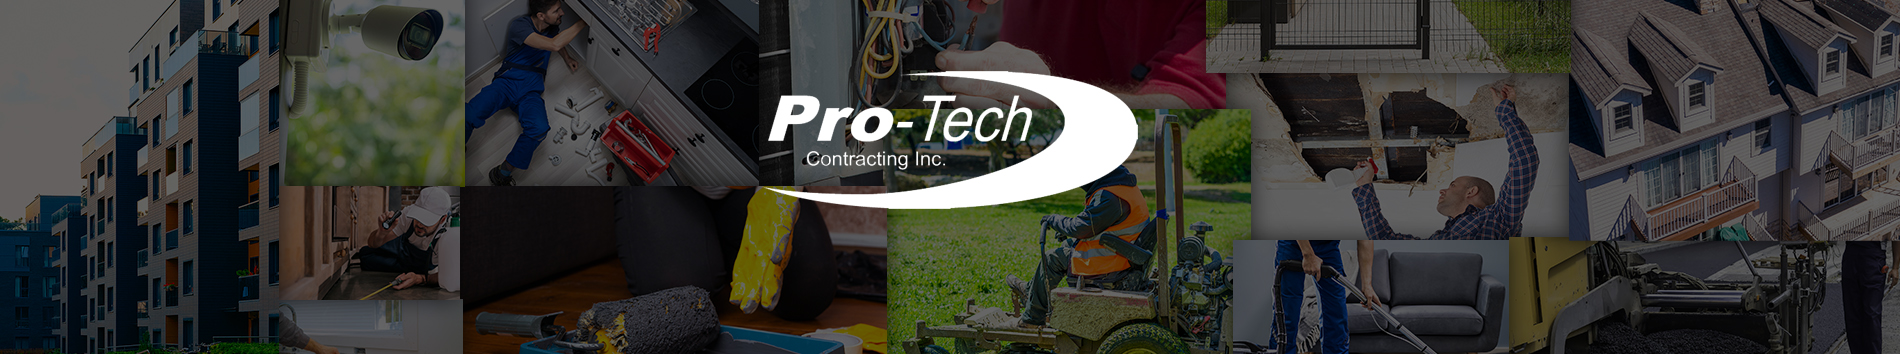 Pro-Tech Contracting, Inc.